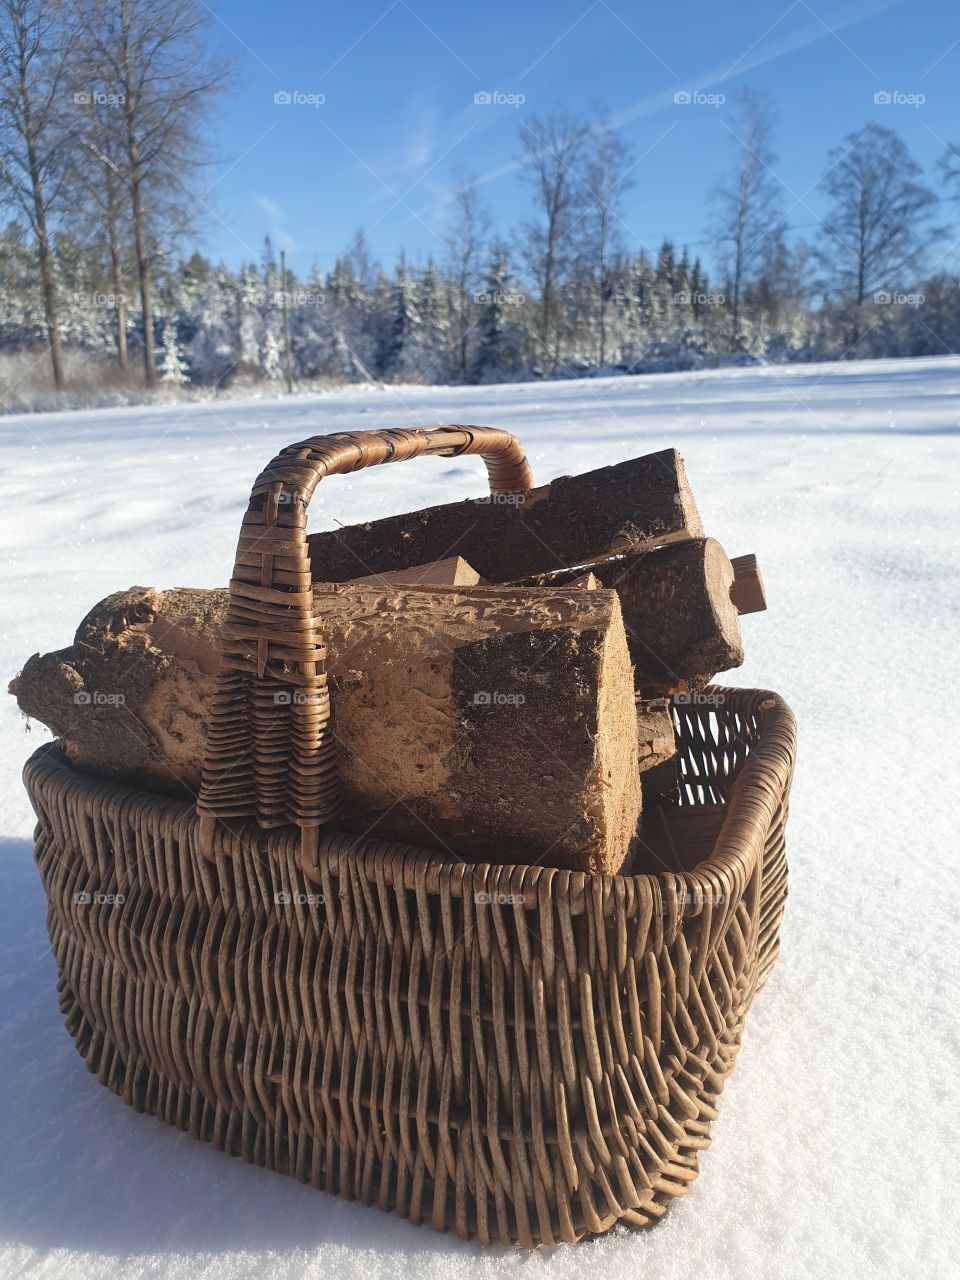 An old basket of fire wood